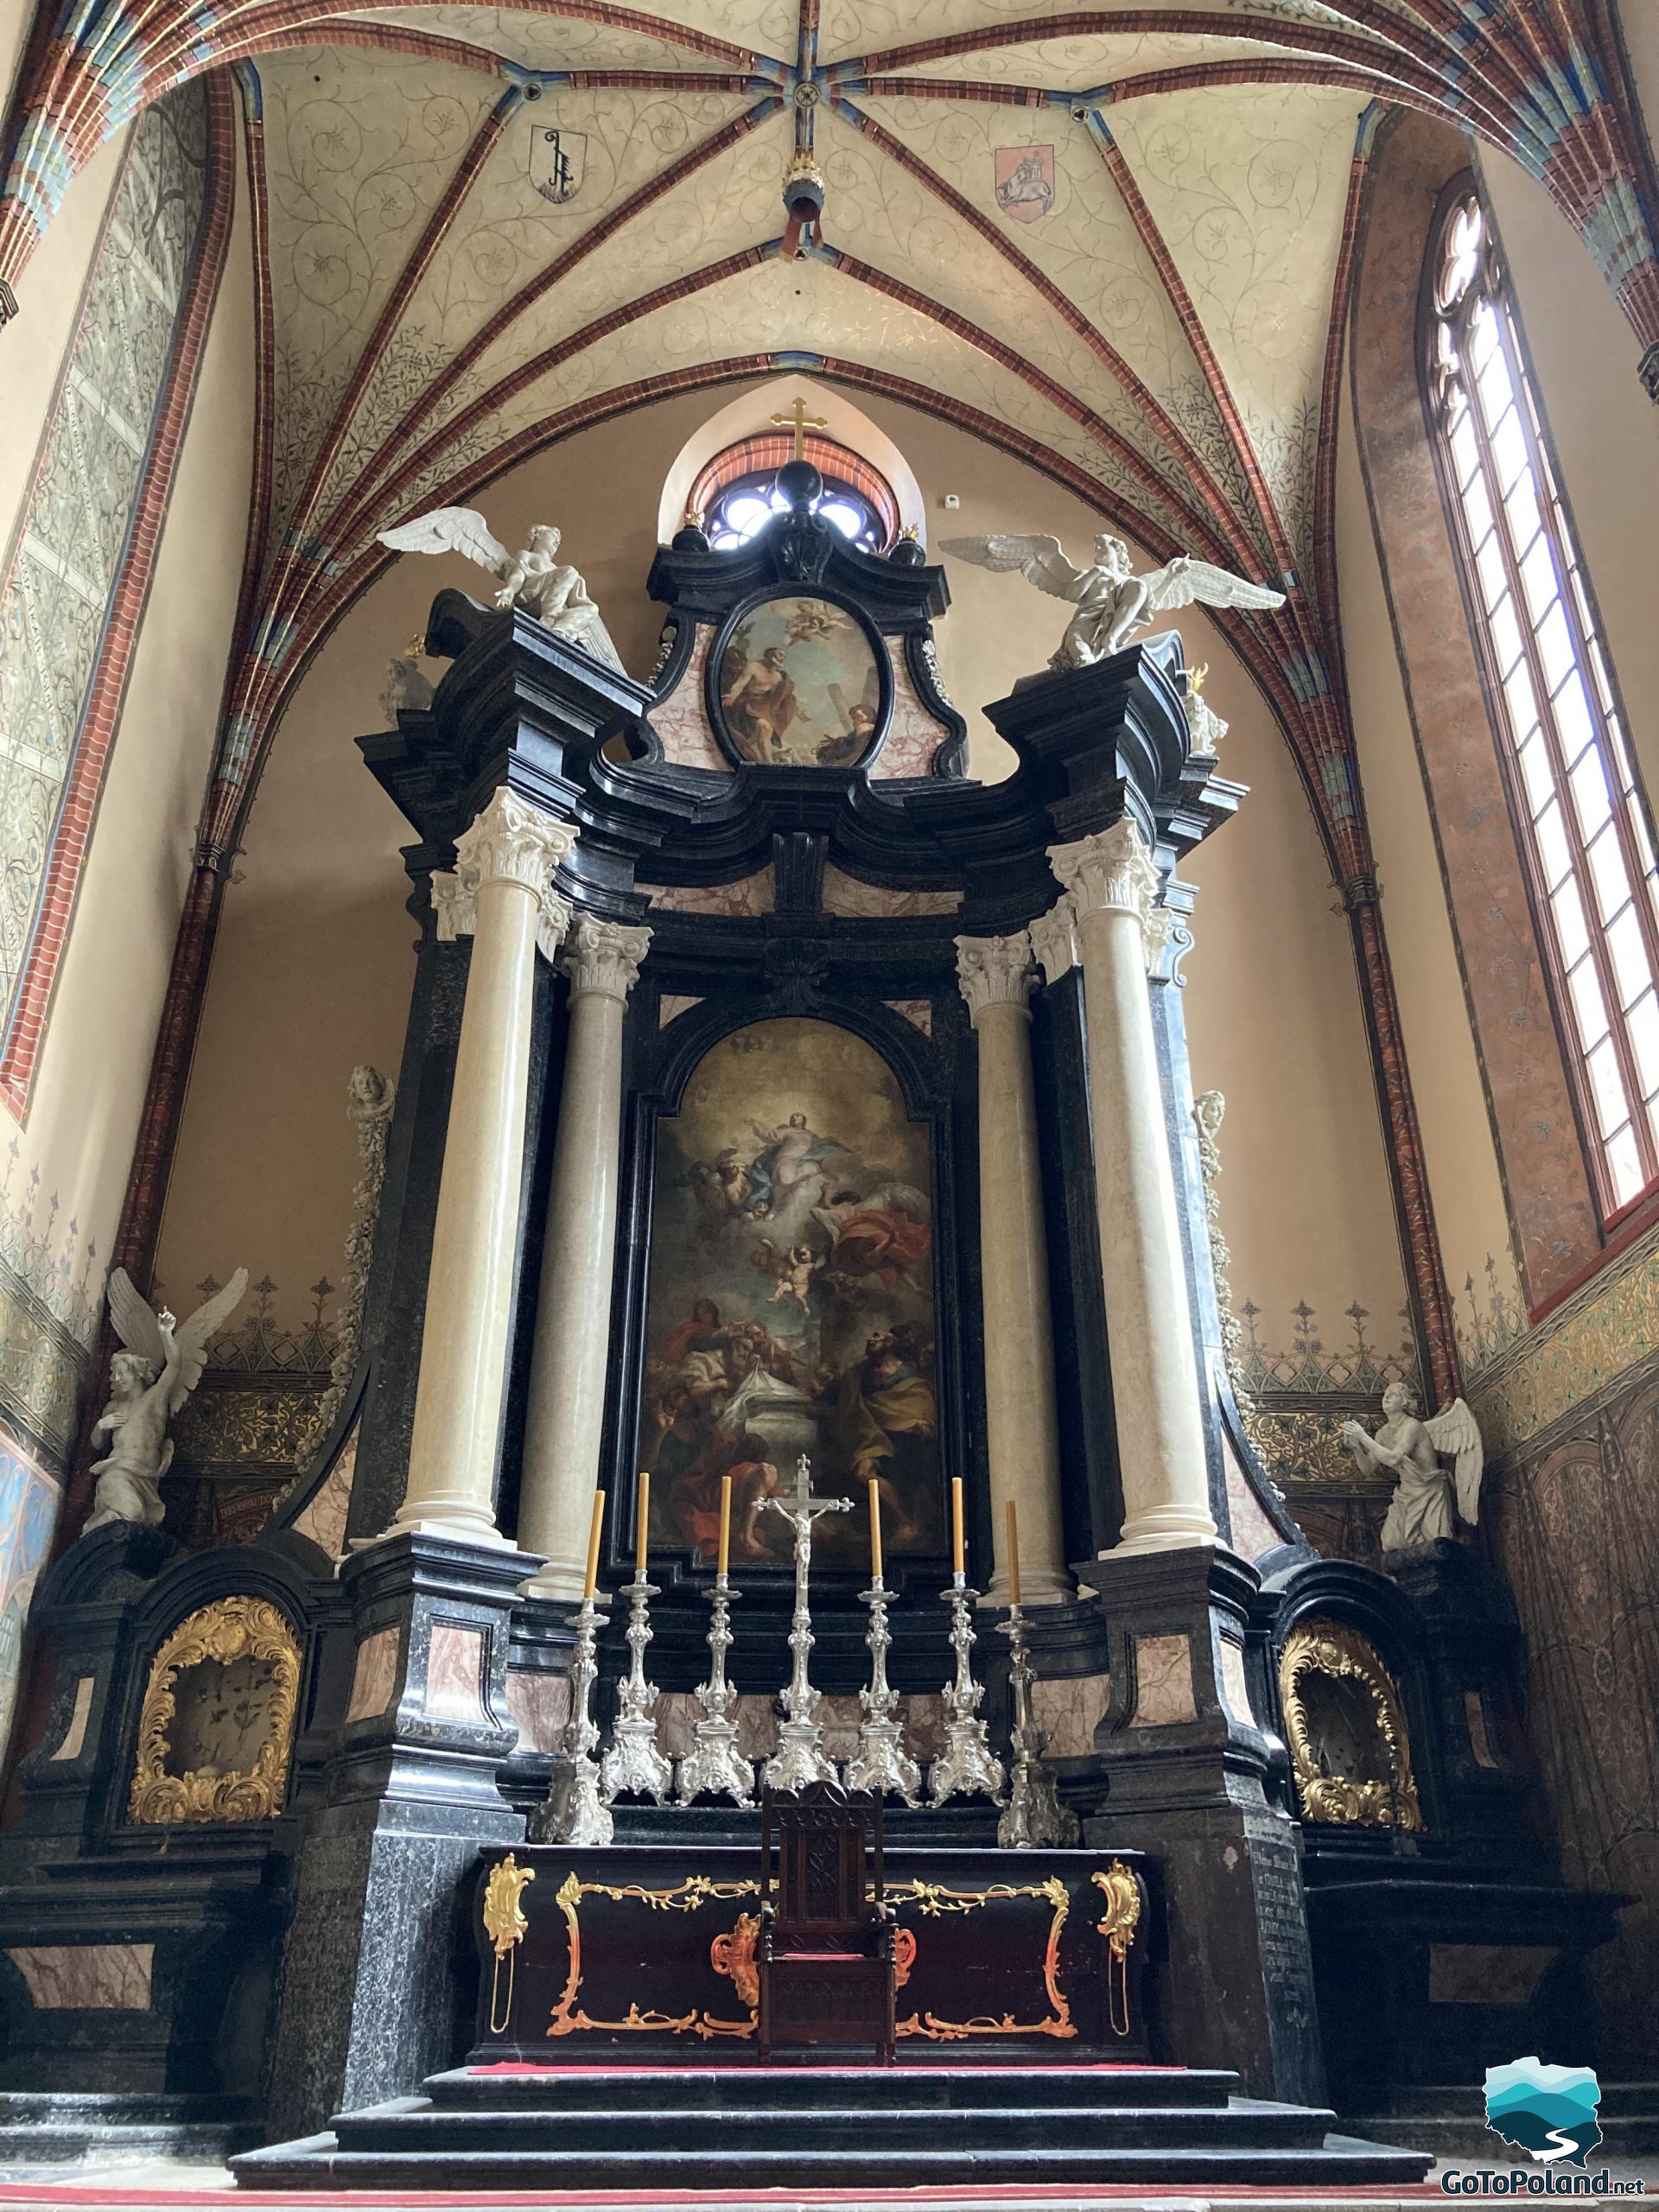 the main altar in the cathedral